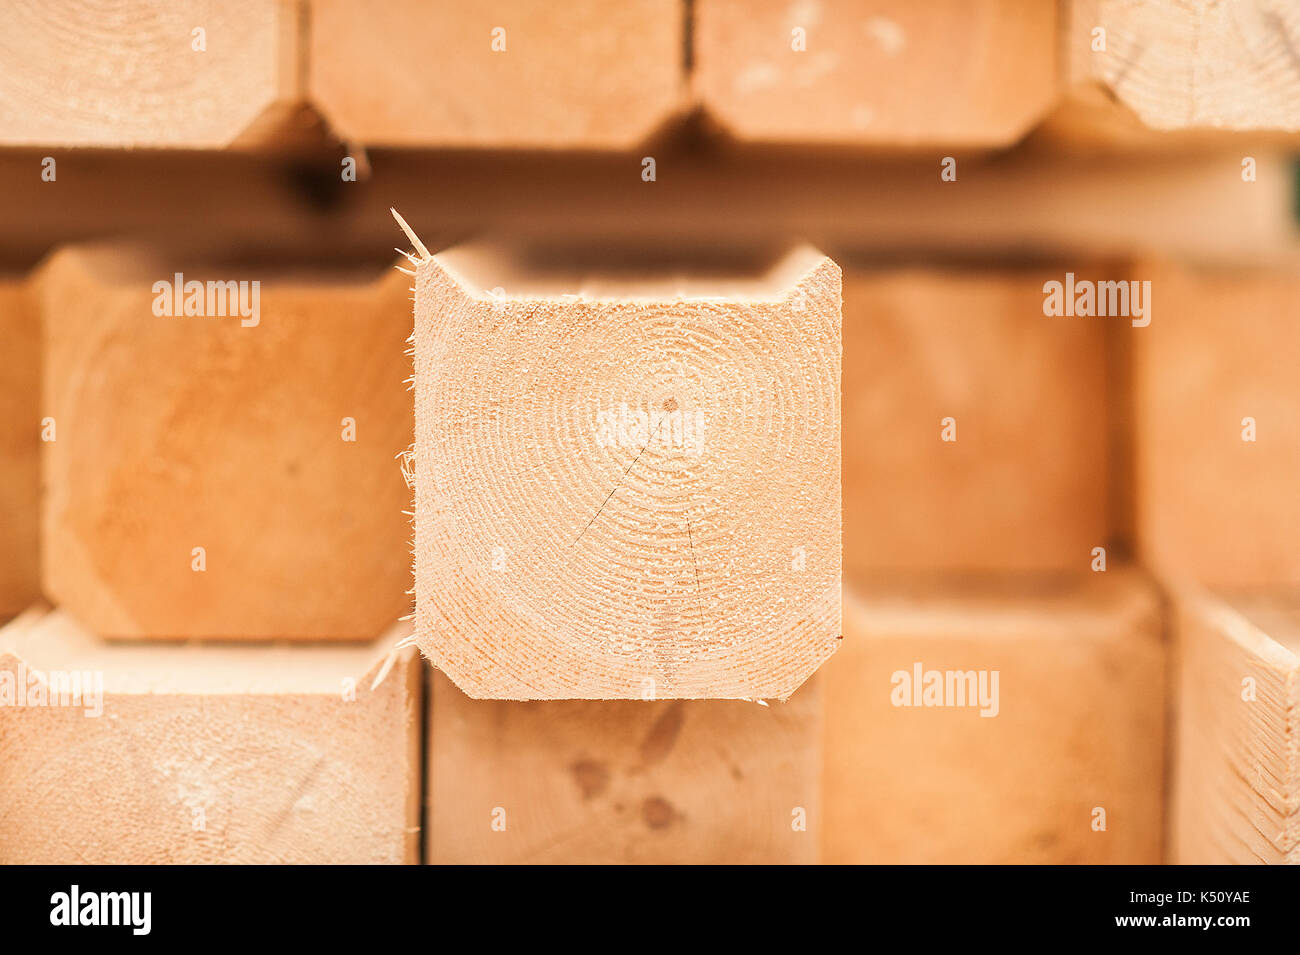 lumber industrial wood texture, timber butts background. Butt end of a processed wooden beam. Stock Photo